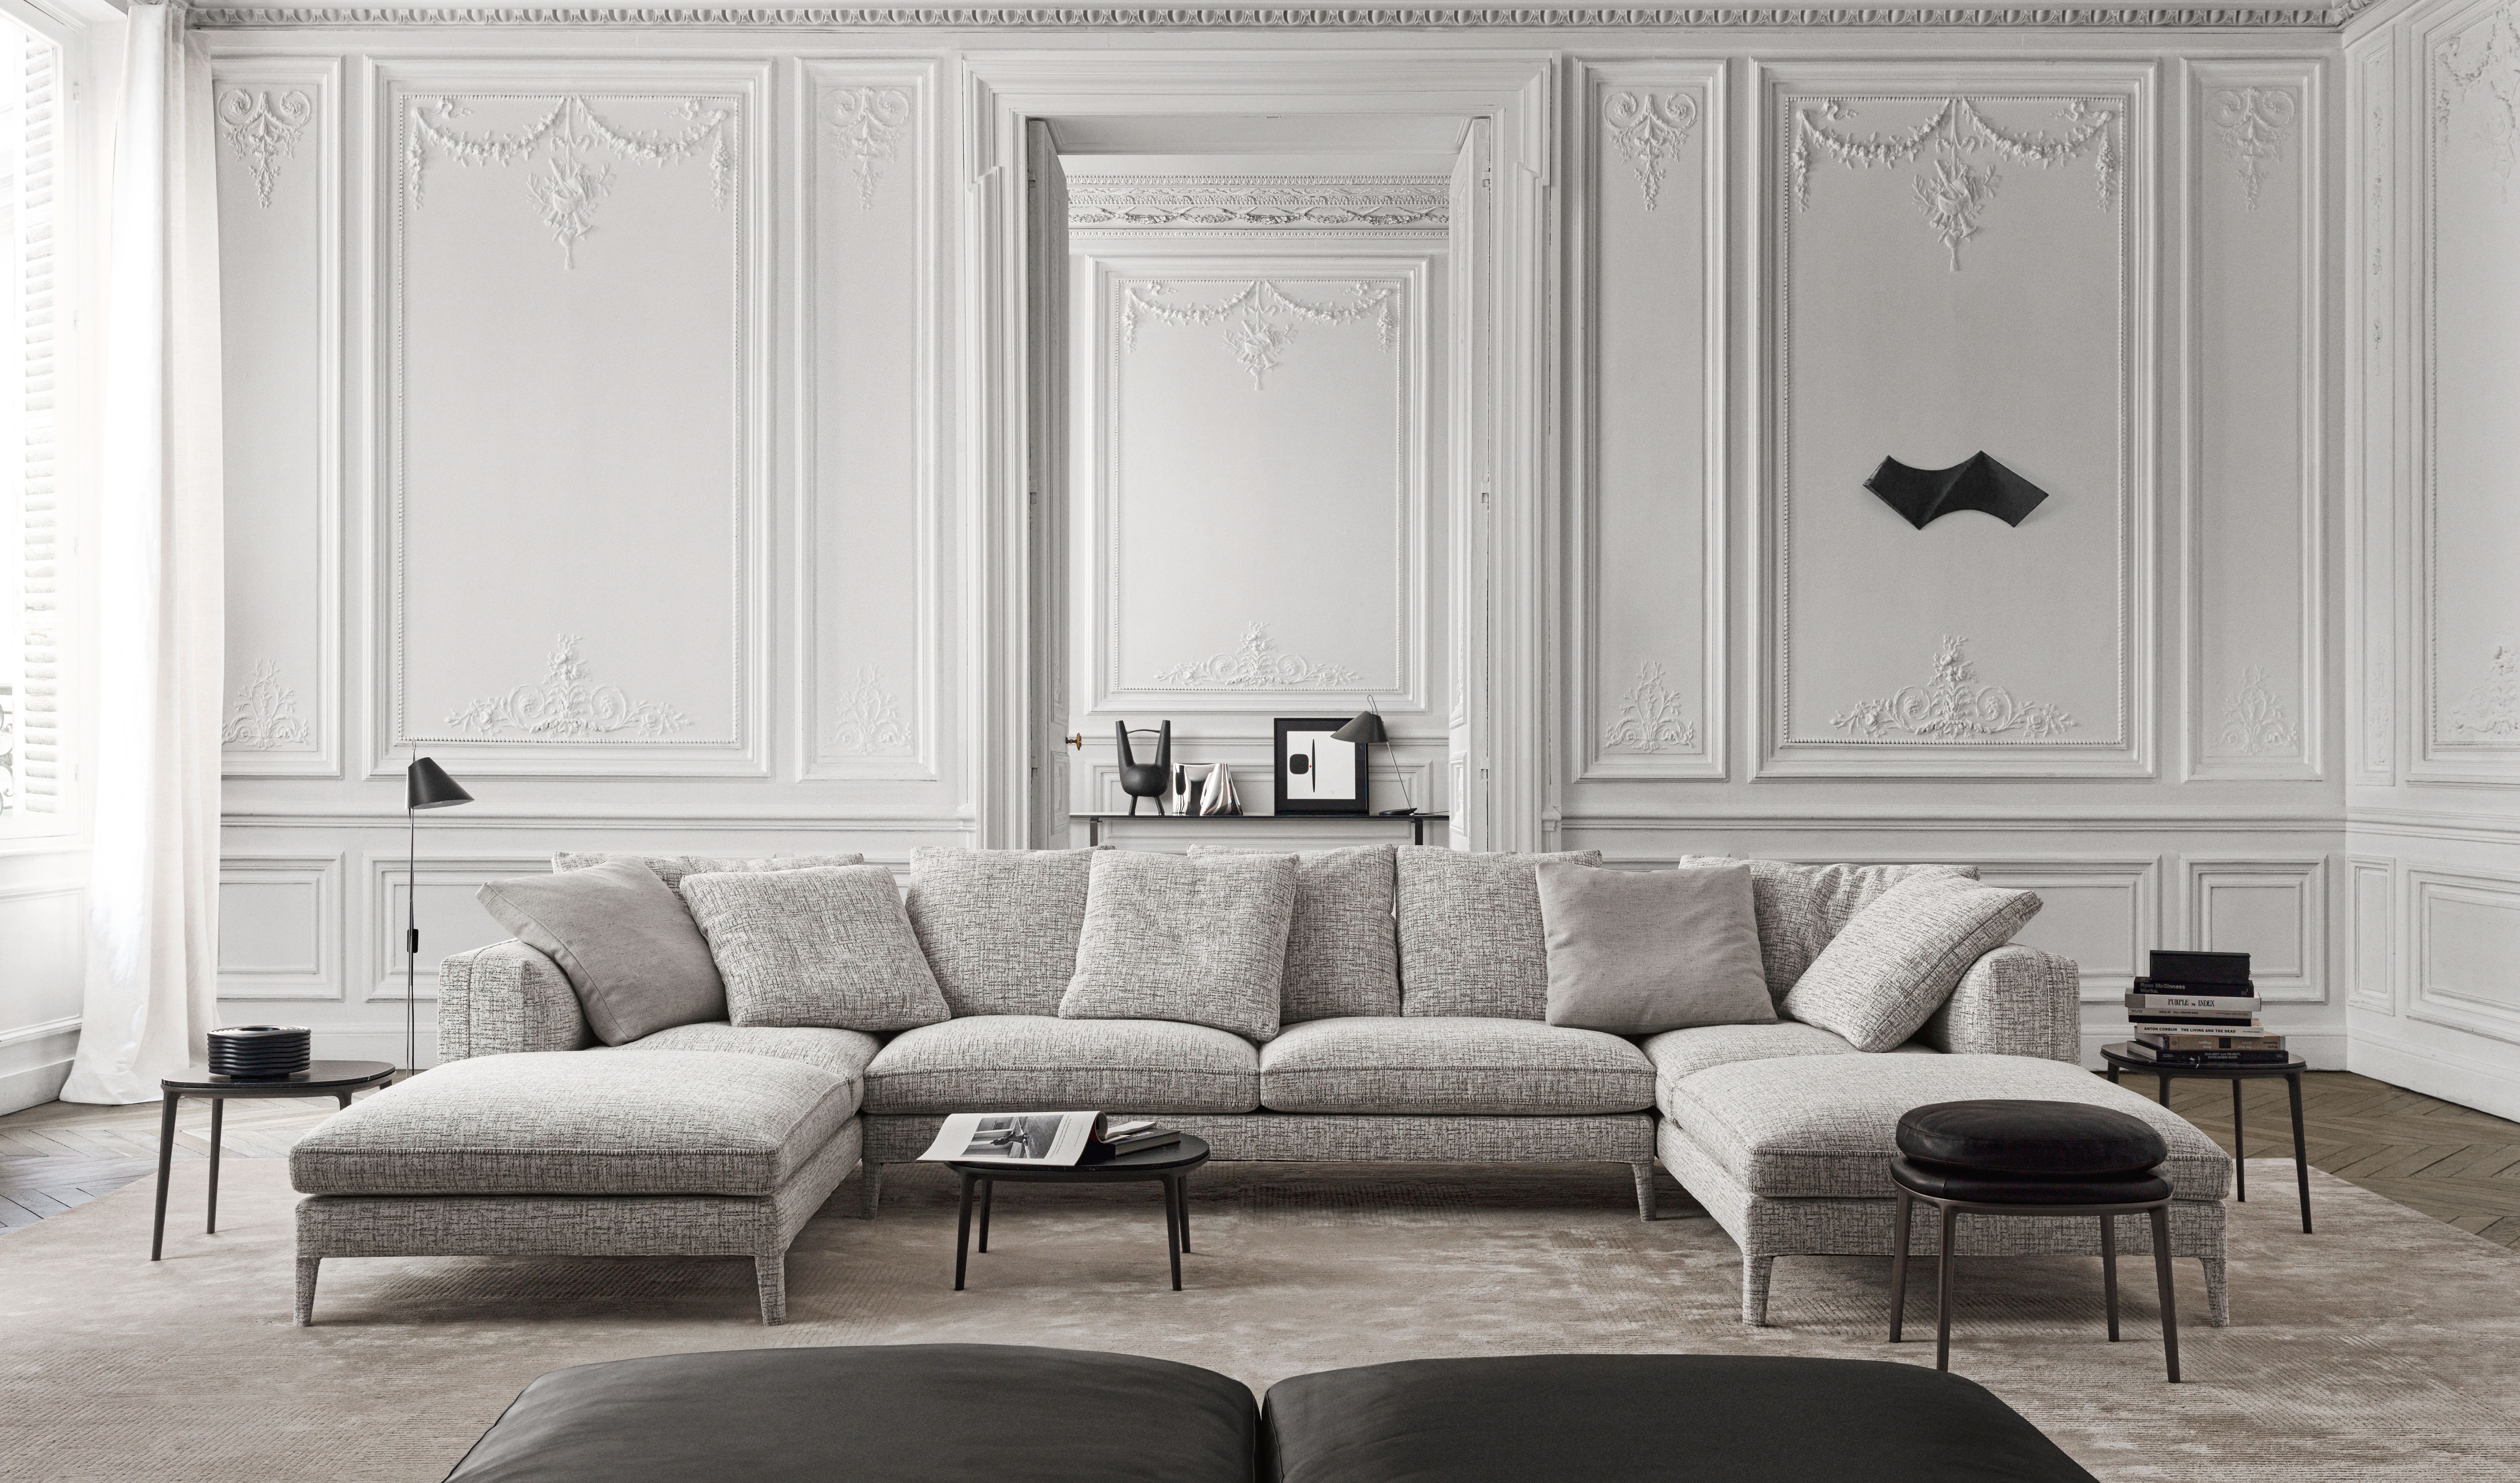 The Dives sofa and its soft upholstery and classic lines by Antonio Citterio for Maxalto. Photo c/o Maxalto. 